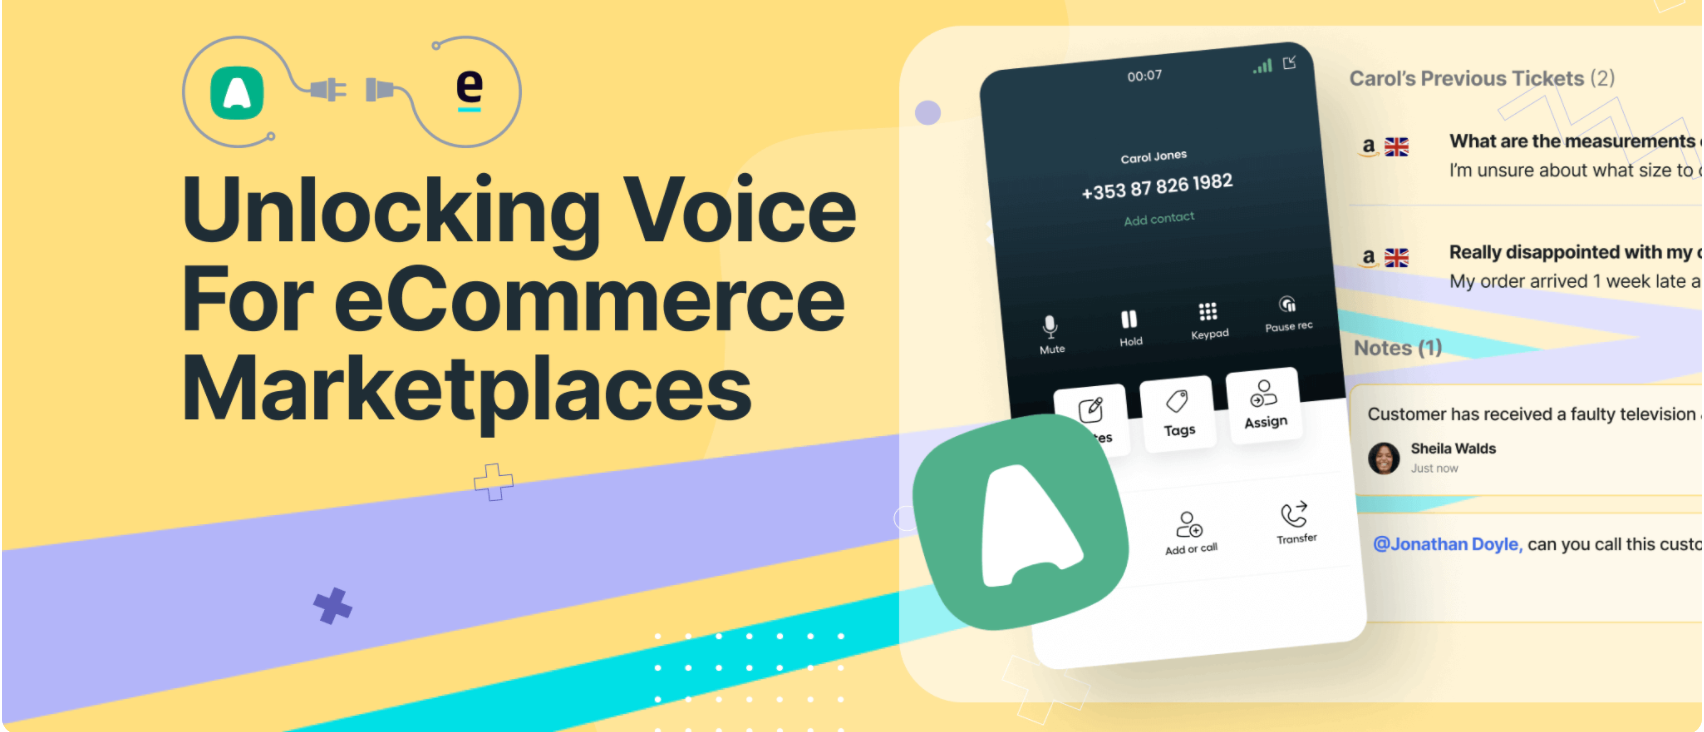 eDesk and Aircall: Unlocking Voice for eCommerce Marketplaces